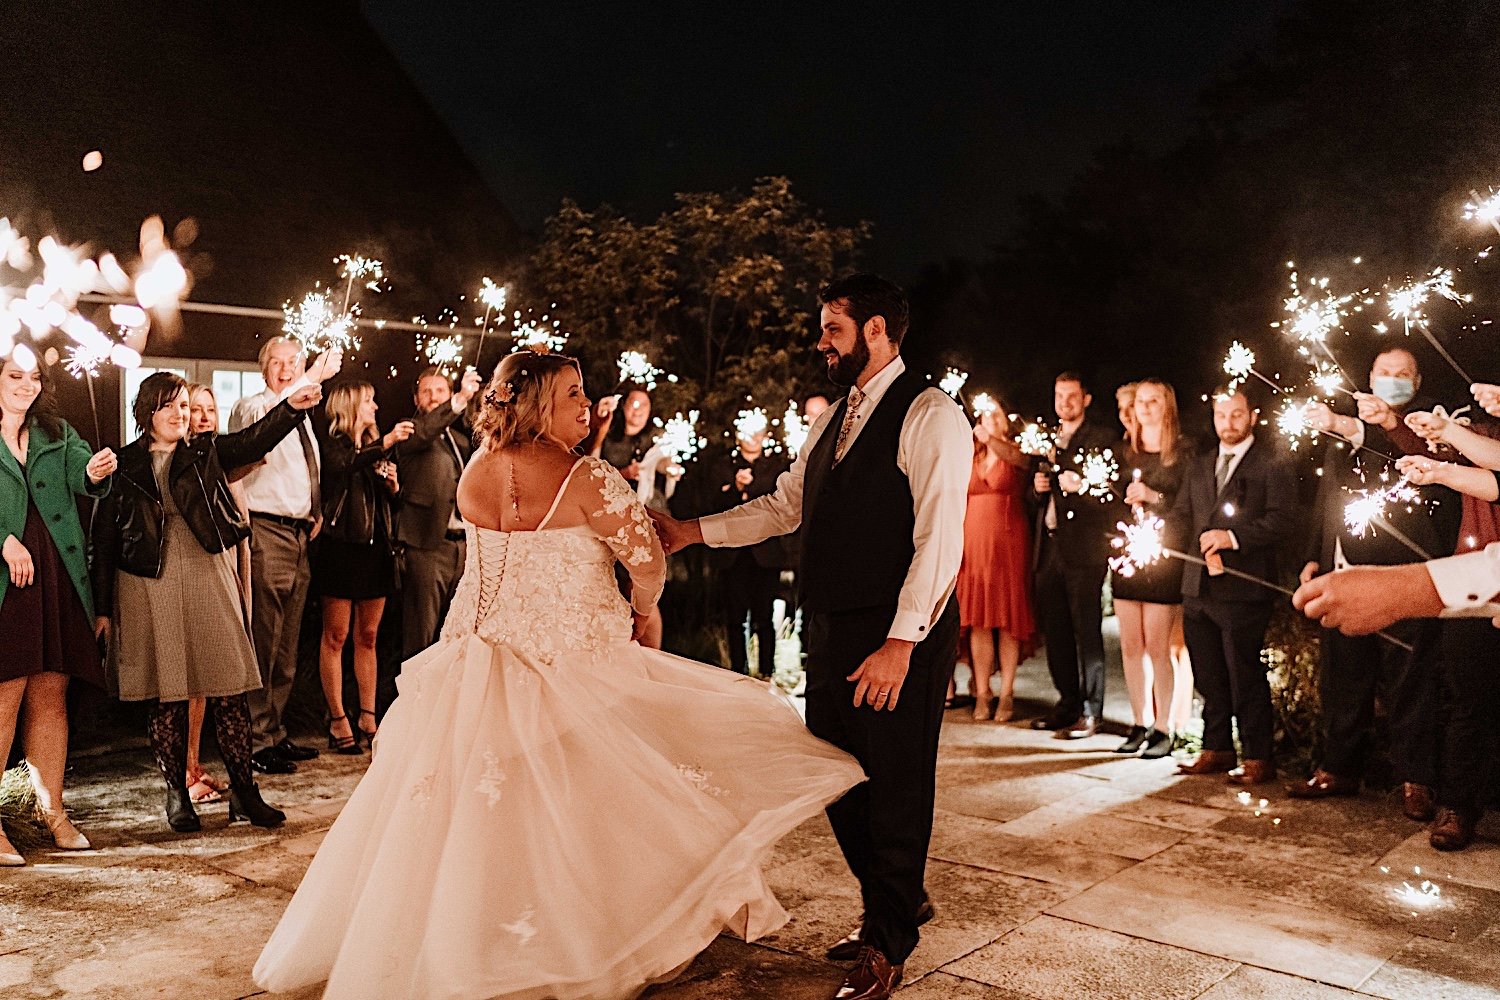 Bride and groom share first dance surrounded by sparklers at Lake Ellyn Boathouse wedding